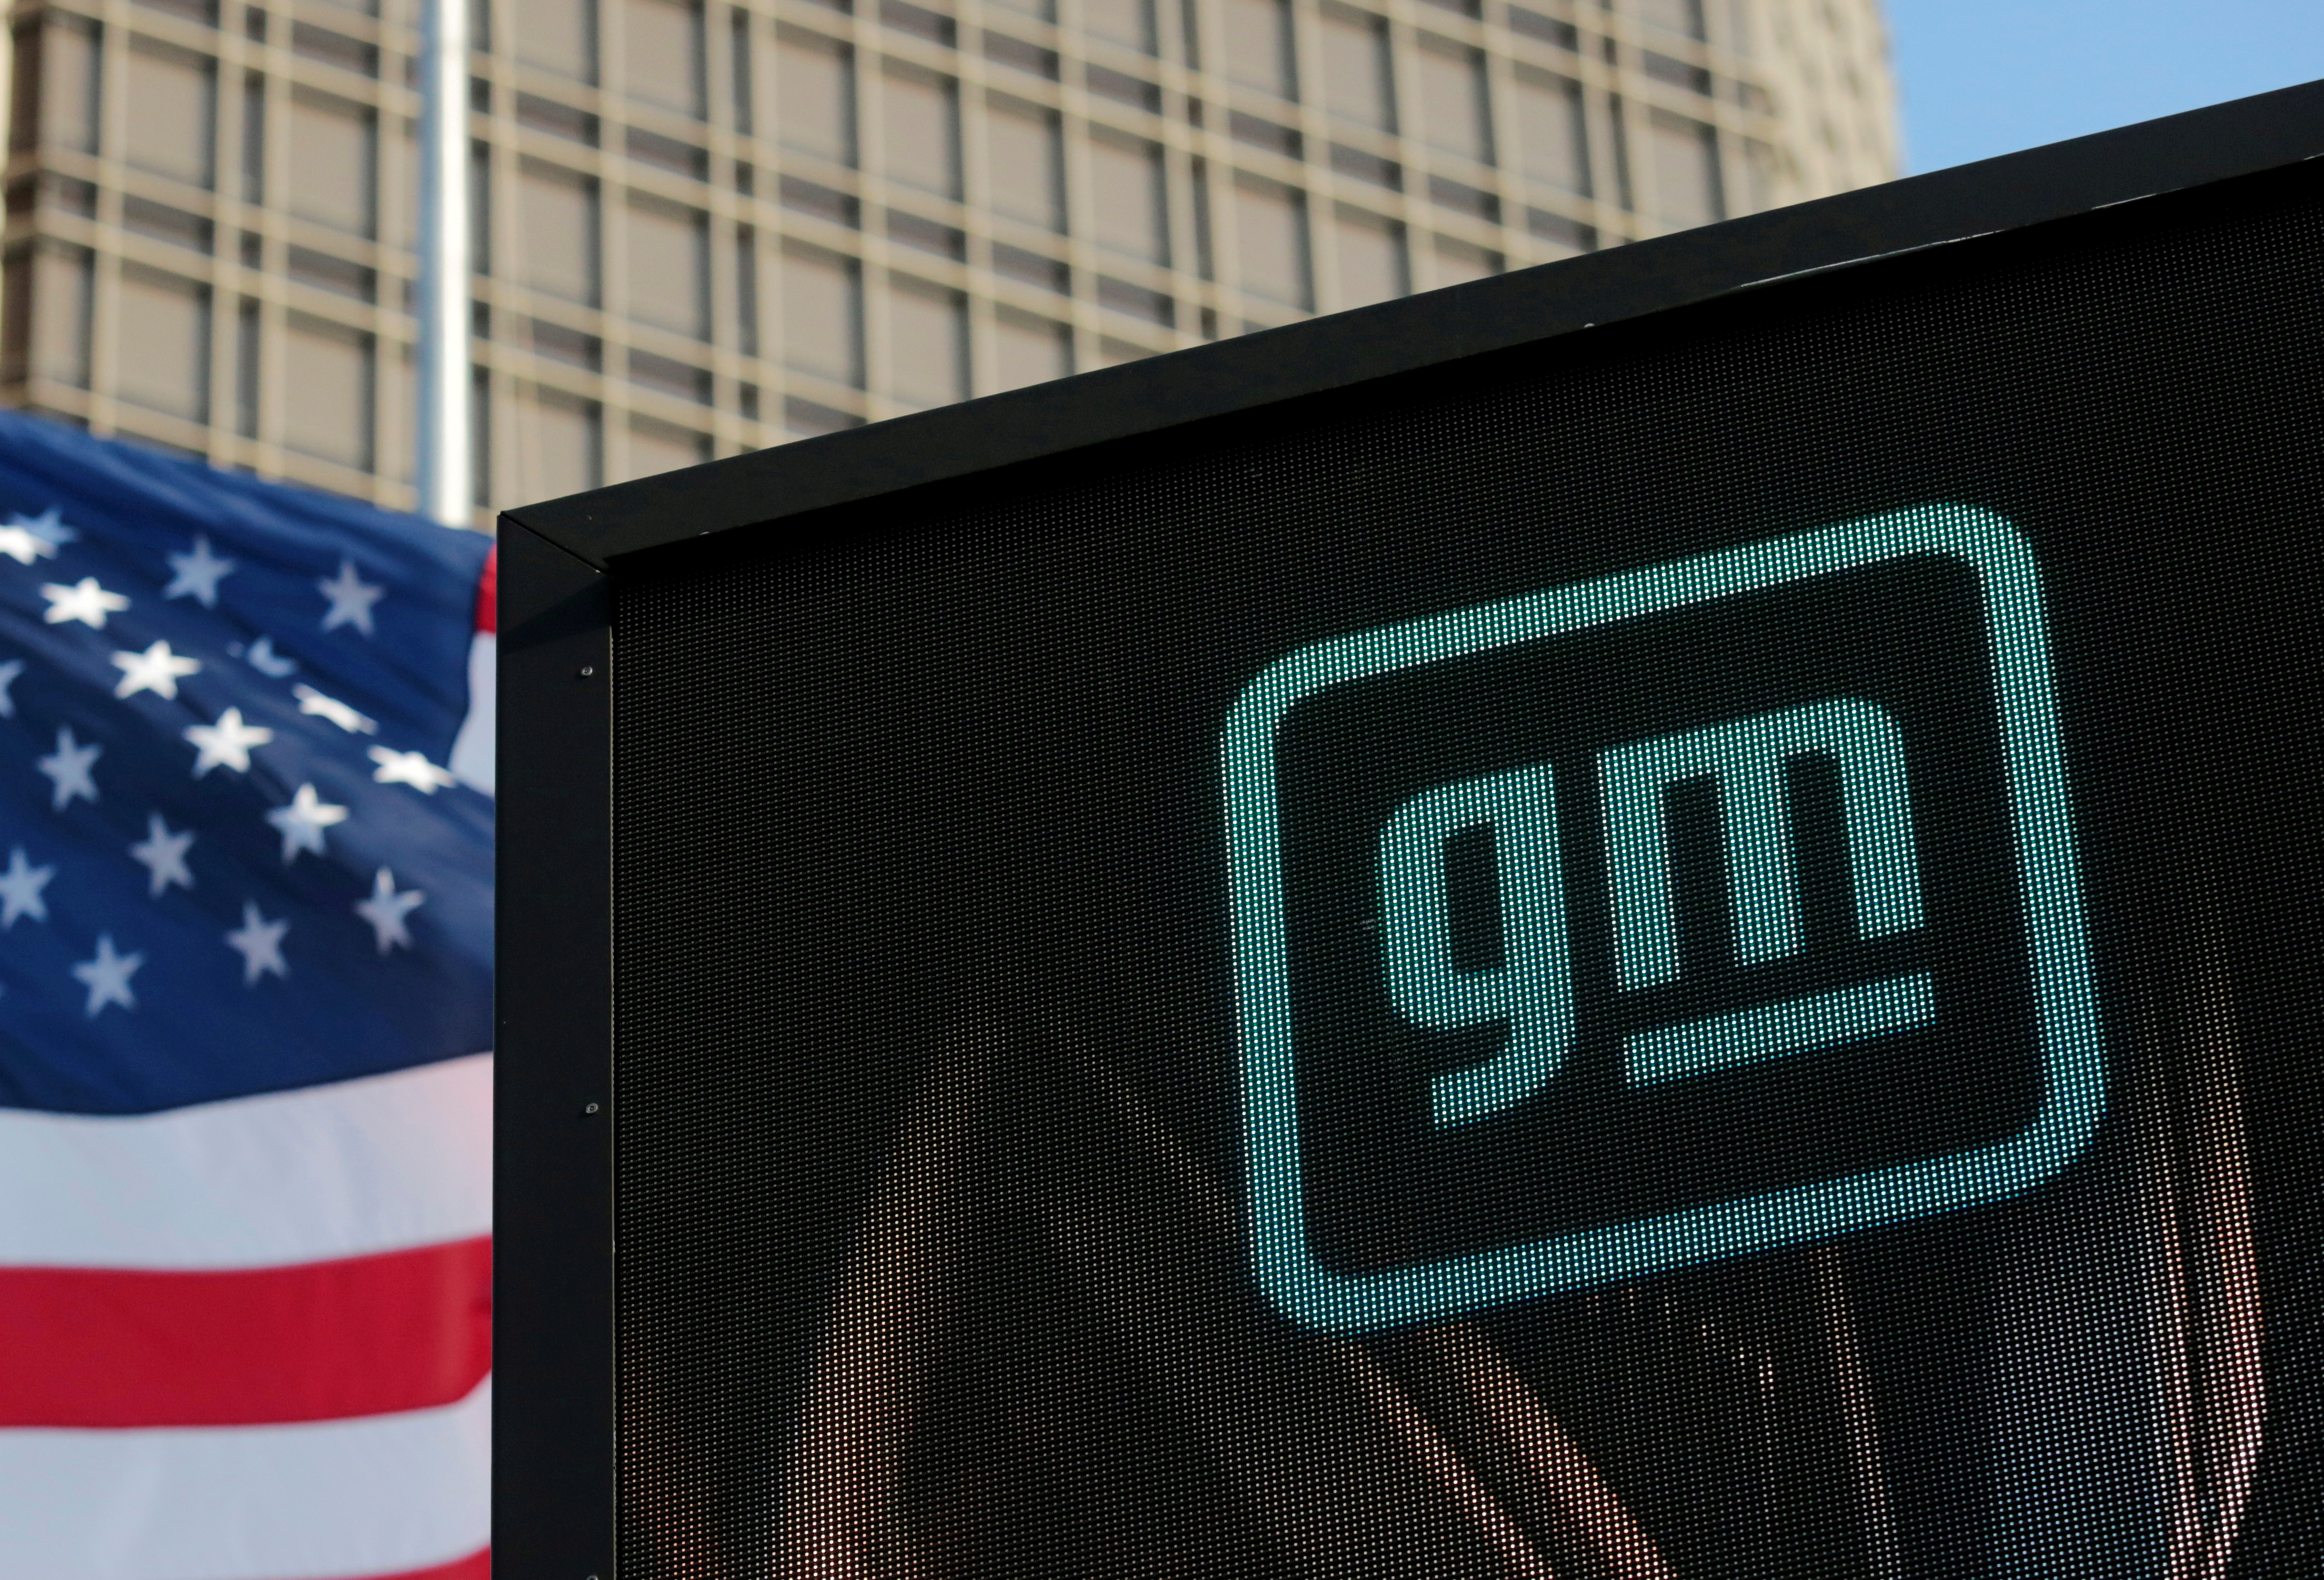 The new GM logo is seen on the facade of the General Motors headquarters in Detroit, Michigan, U.S., March 16, 2021. REUTERS/Rebecca Cook